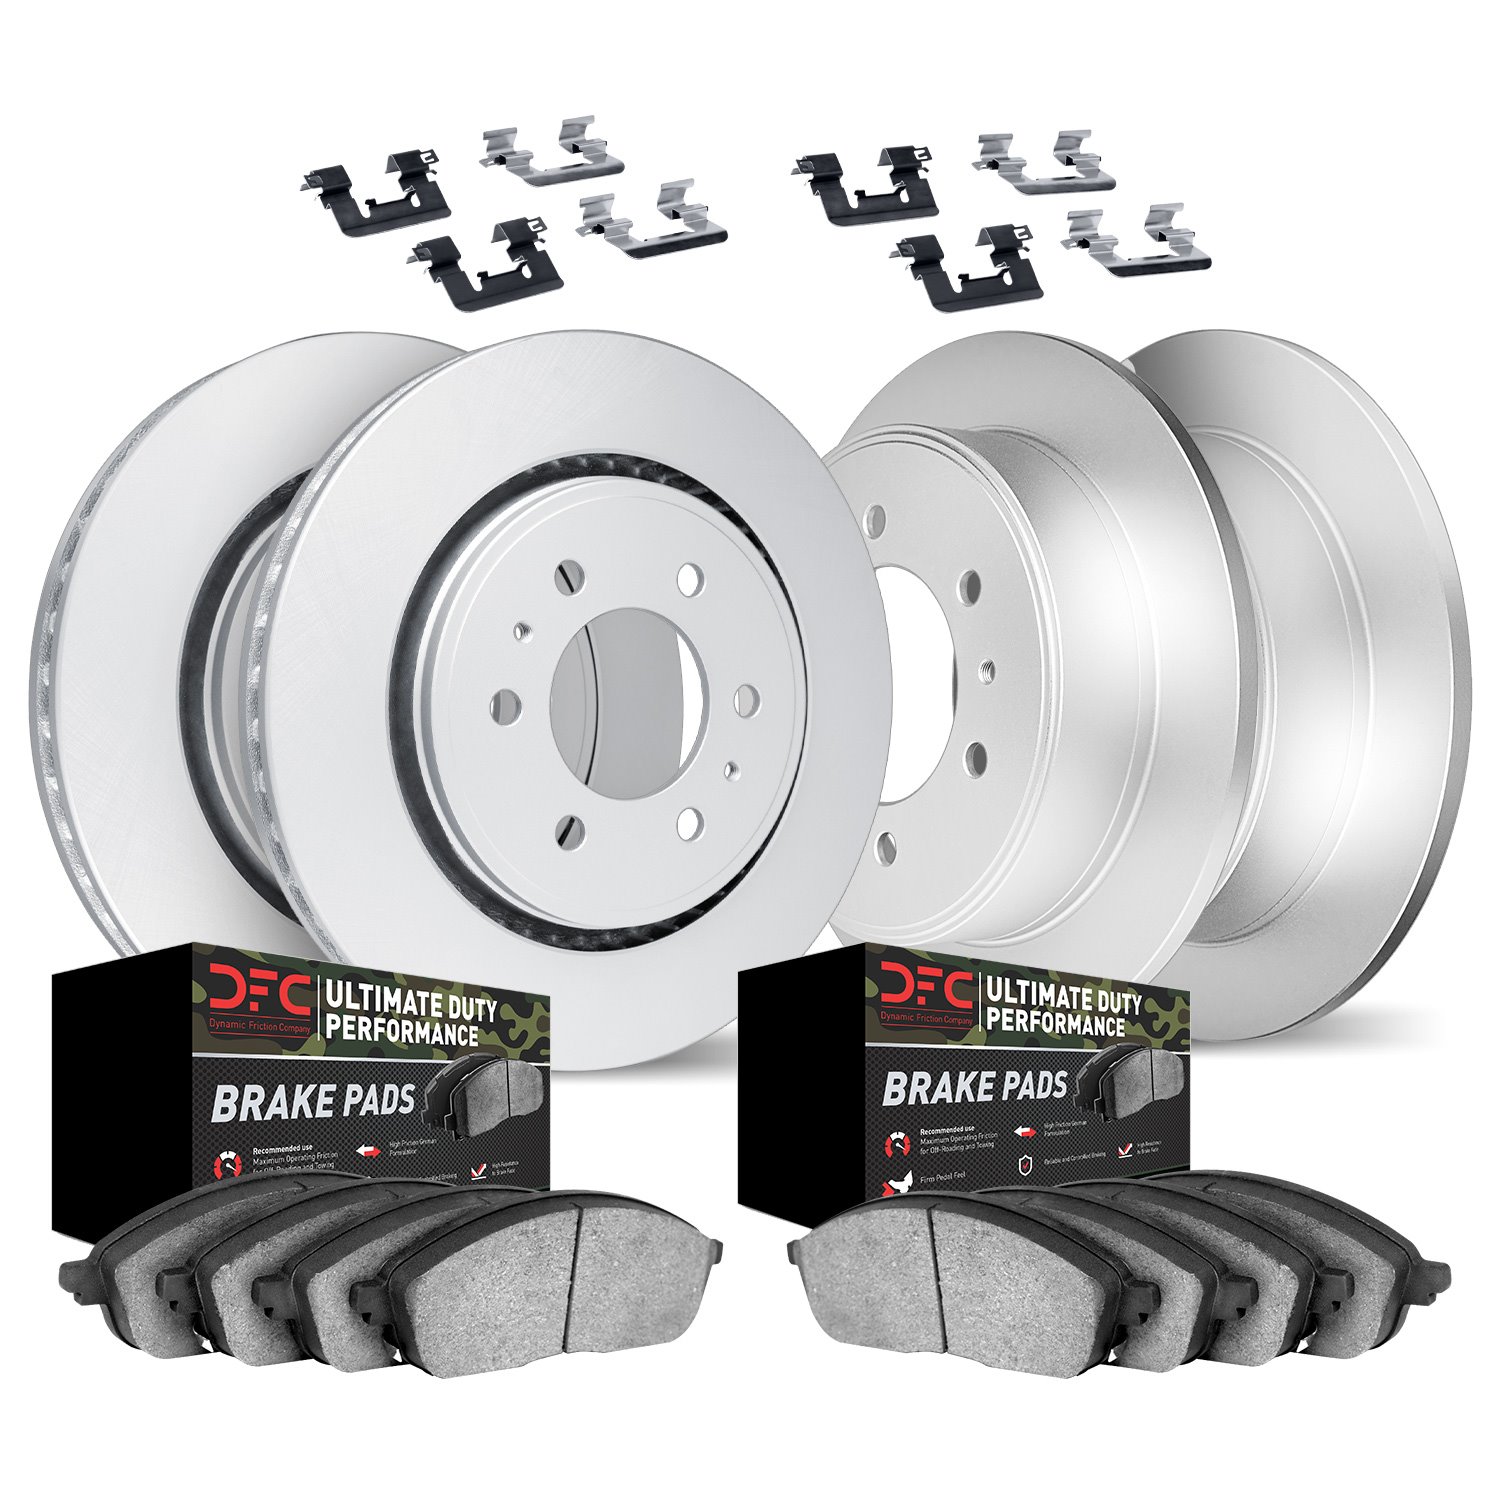 4414-67004 Geospec Brake Rotors with Ultimate-Duty Brake Pads & Hardware, 2007-2015 Infiniti/Nissan, Position: Front and Rear